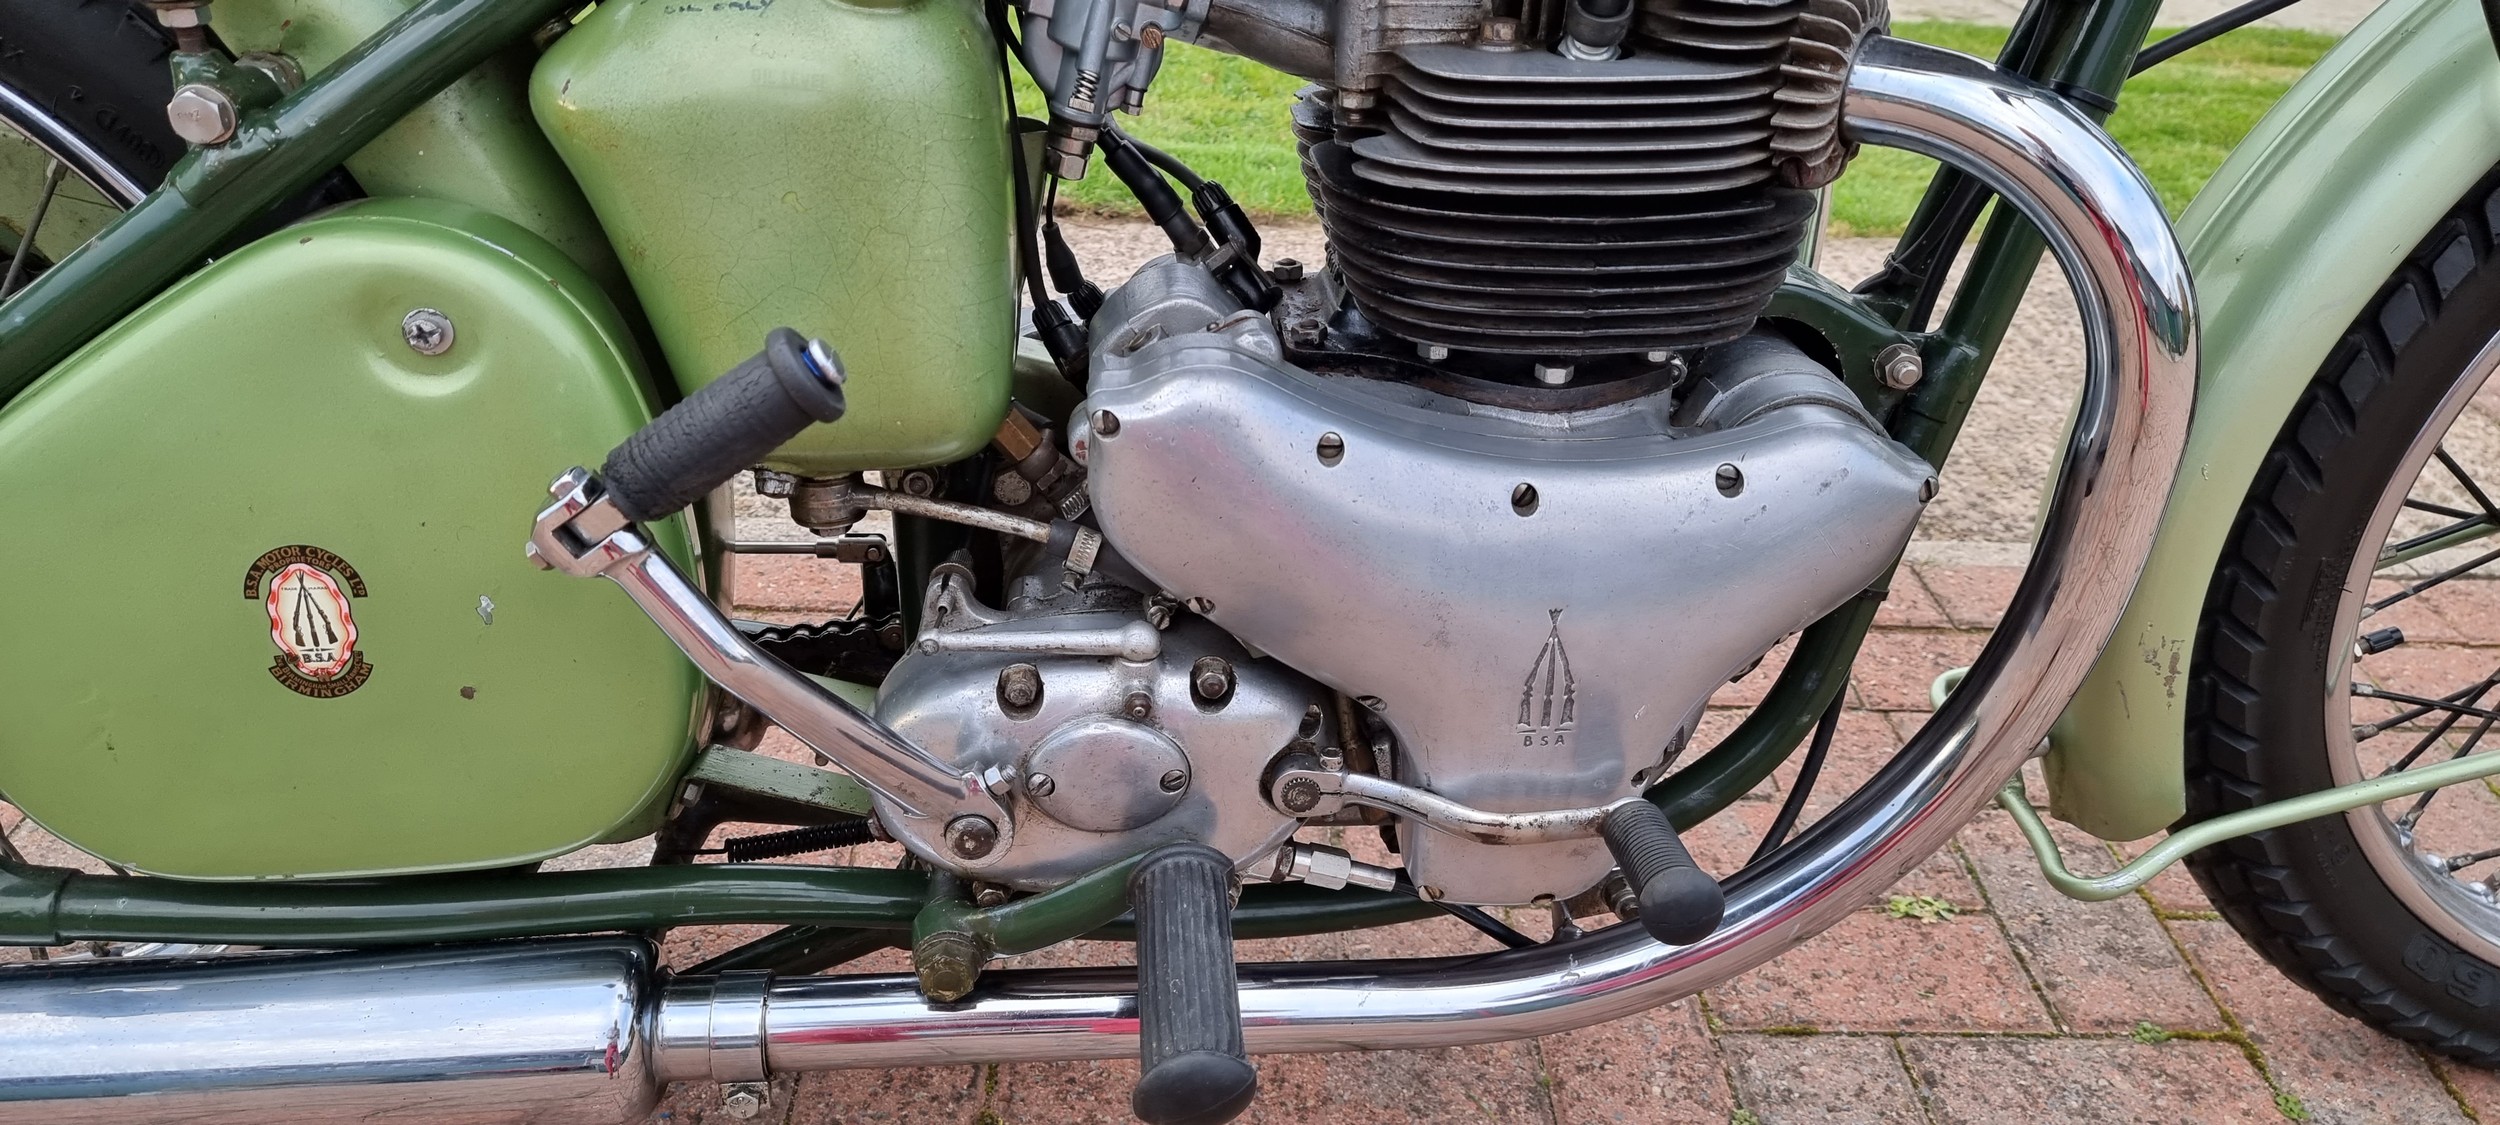 1952 BSA A7 Star Twin, 499cc. Registration number WXG 560 (non transferrable). Frame number BA7S - Image 6 of 13